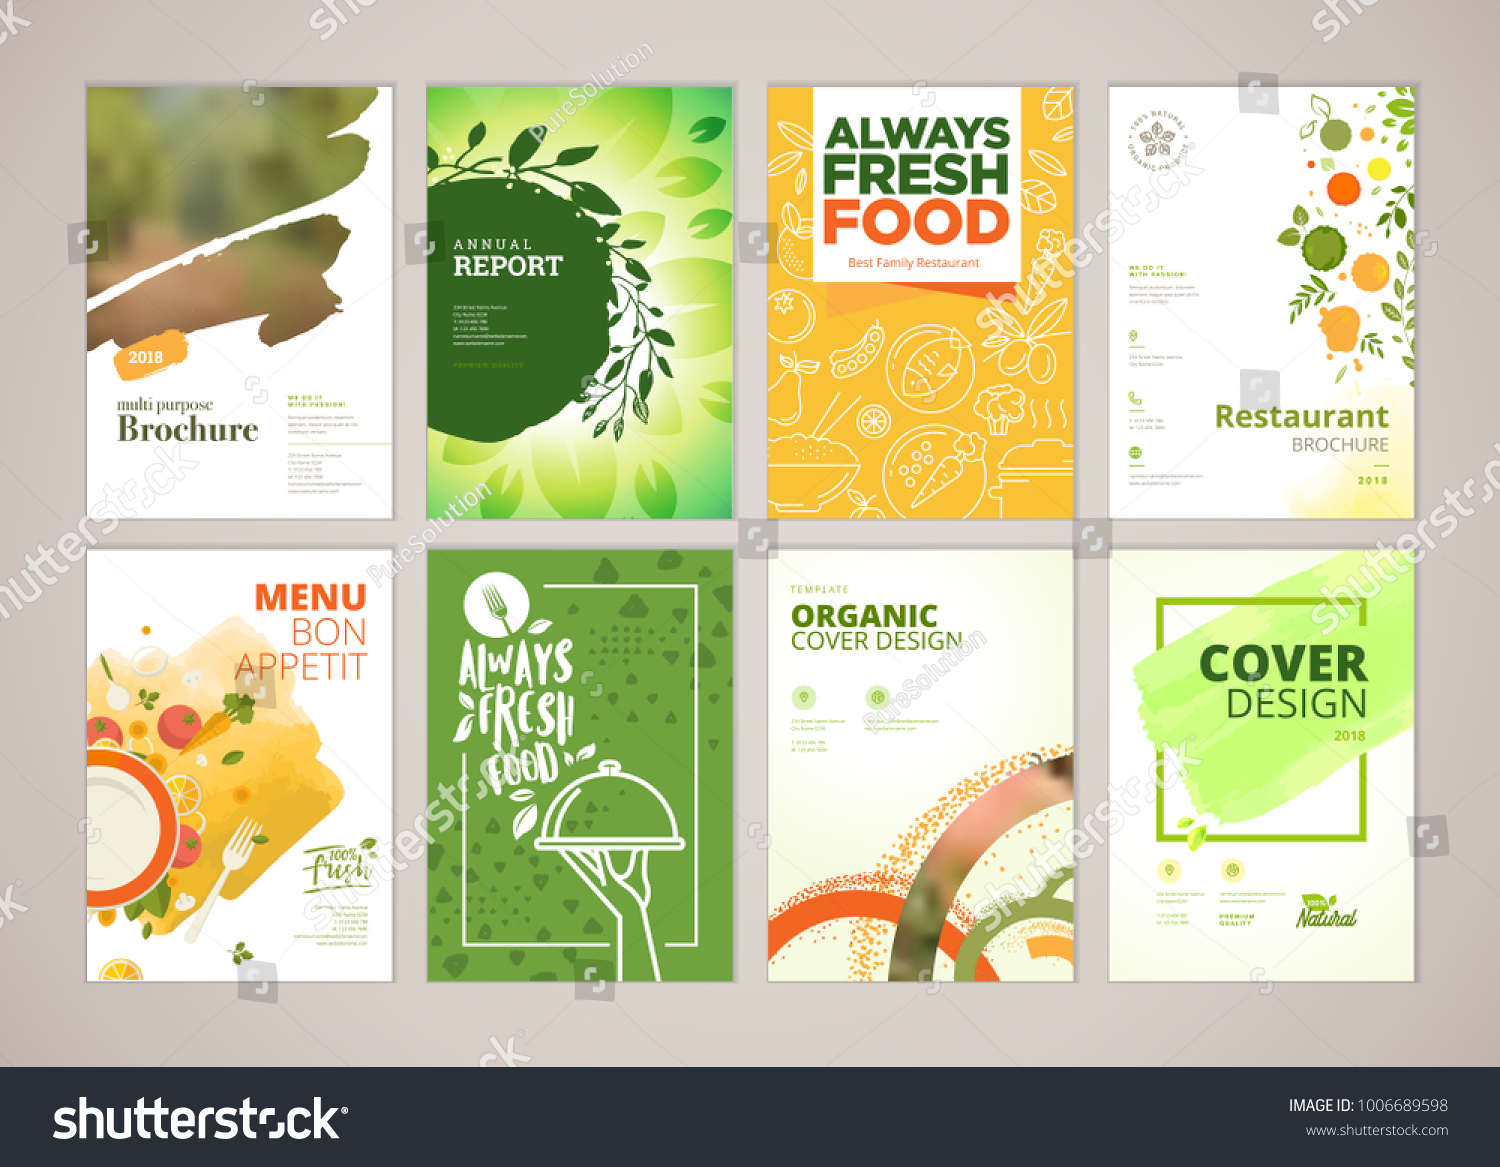 Set of restaurant menu, brochure, flyer design templates in A4 size. Vector illustrations for food and drink marketing material, ads, natural products presentation templates, cover design. #1006689598